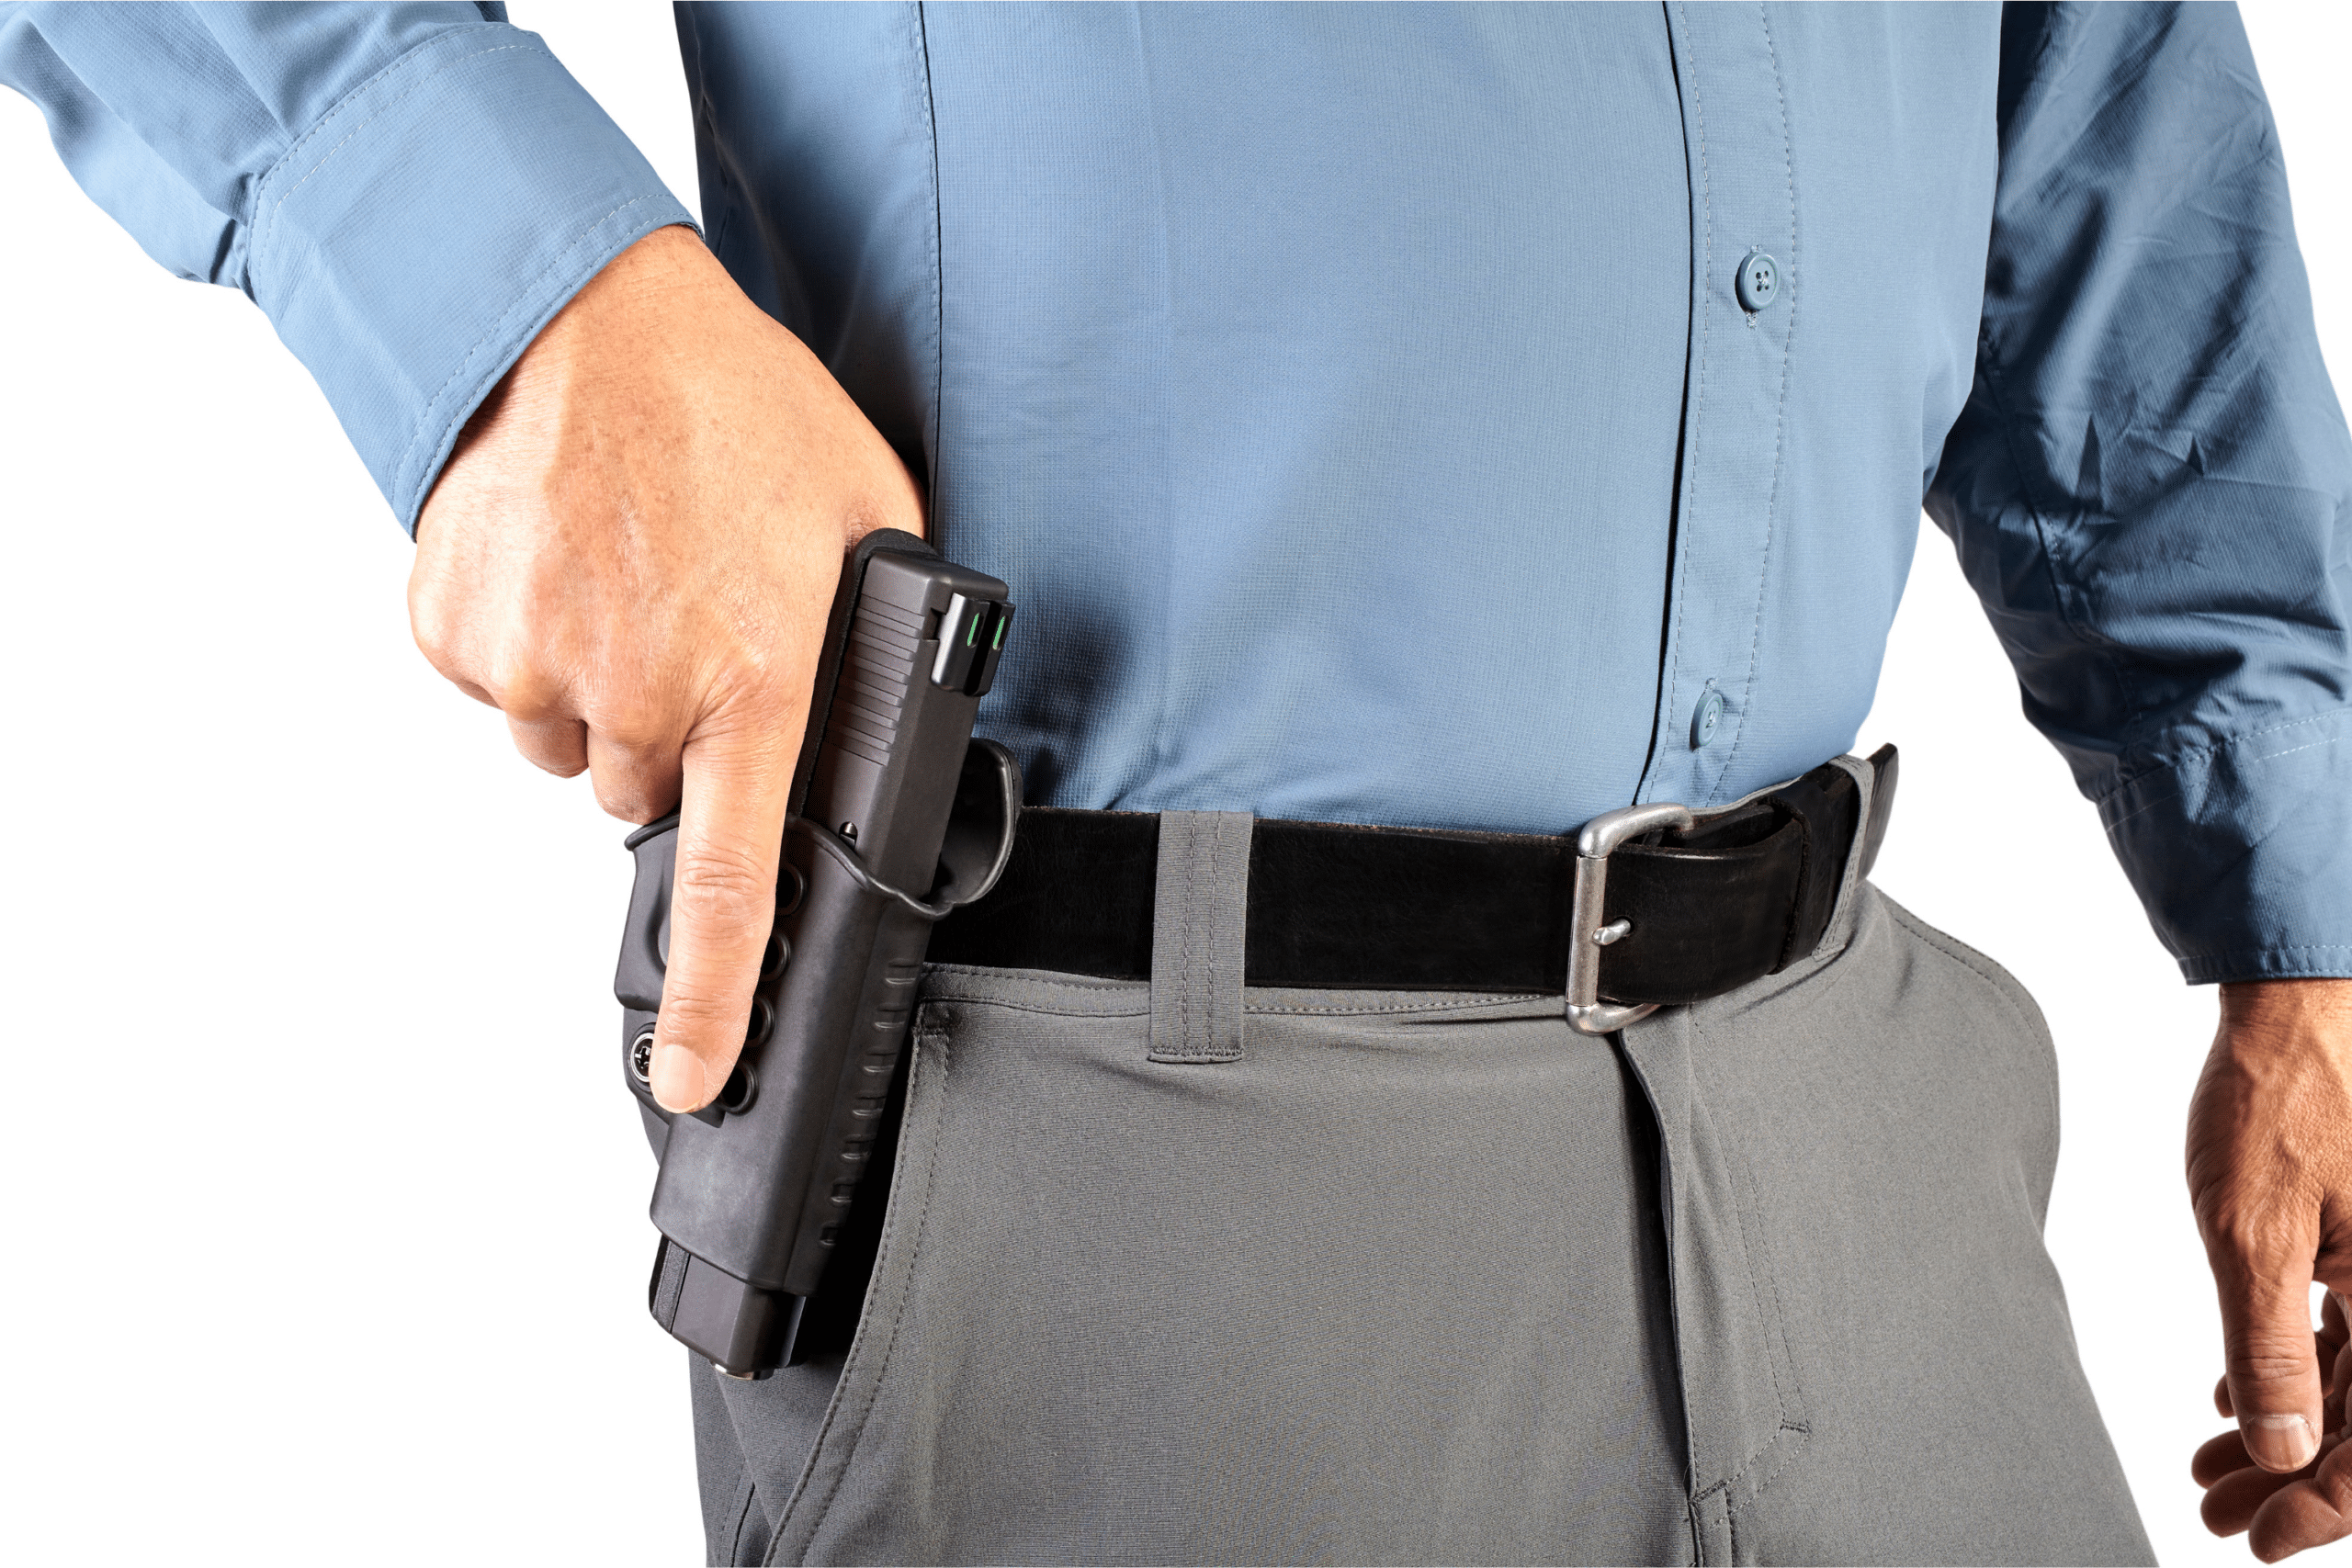 Concealed Carry Laws in Colorado